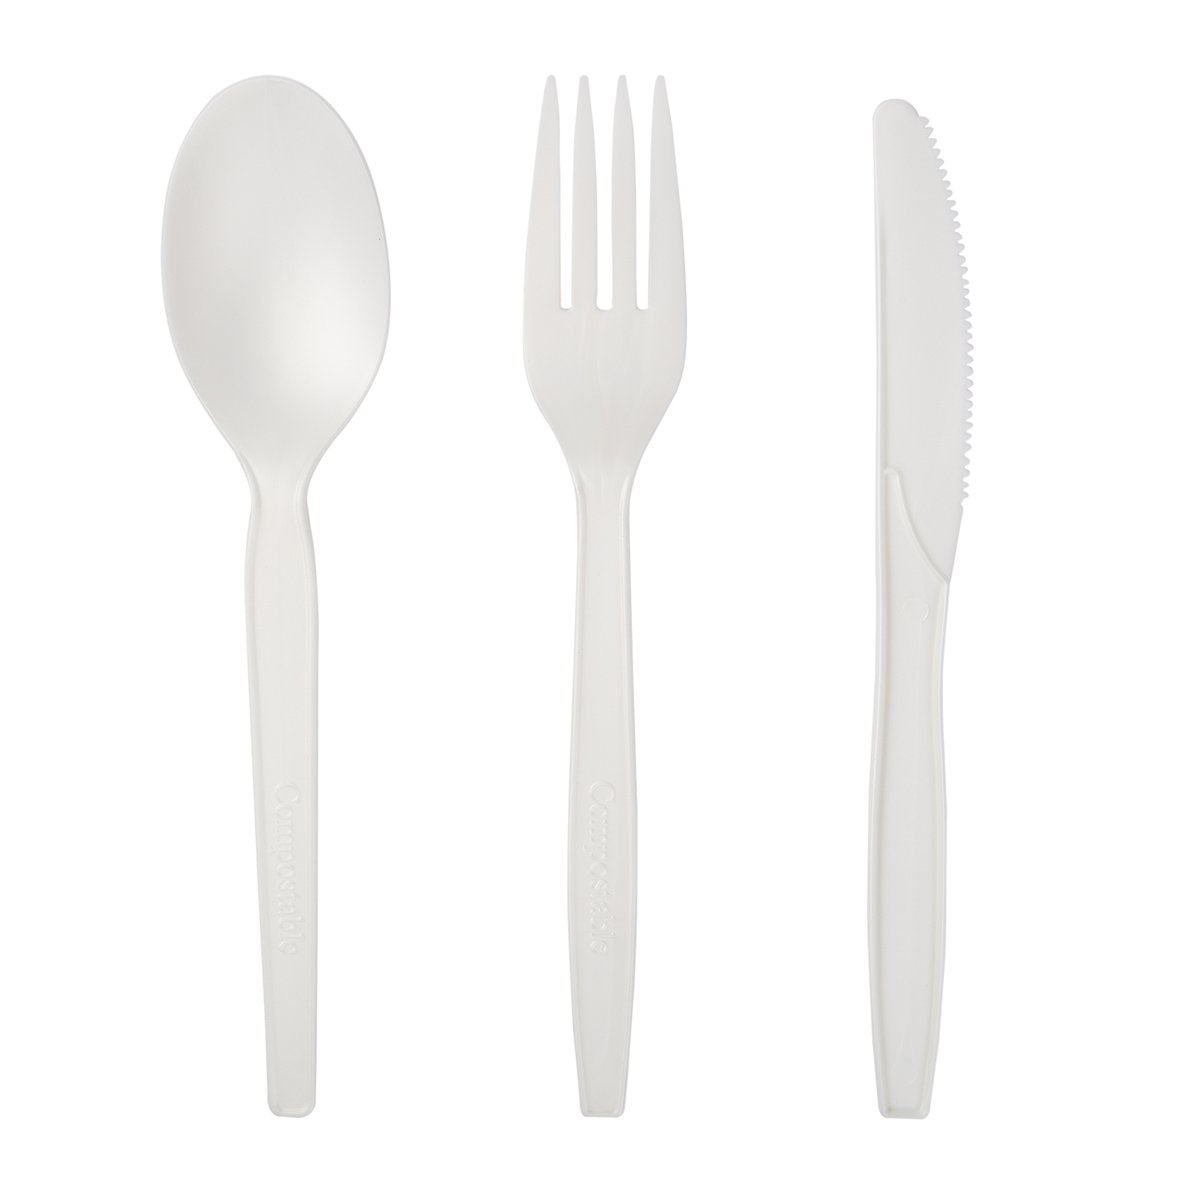 100% Food Grade, Biodegradable and Compostable CPLA Cutlery